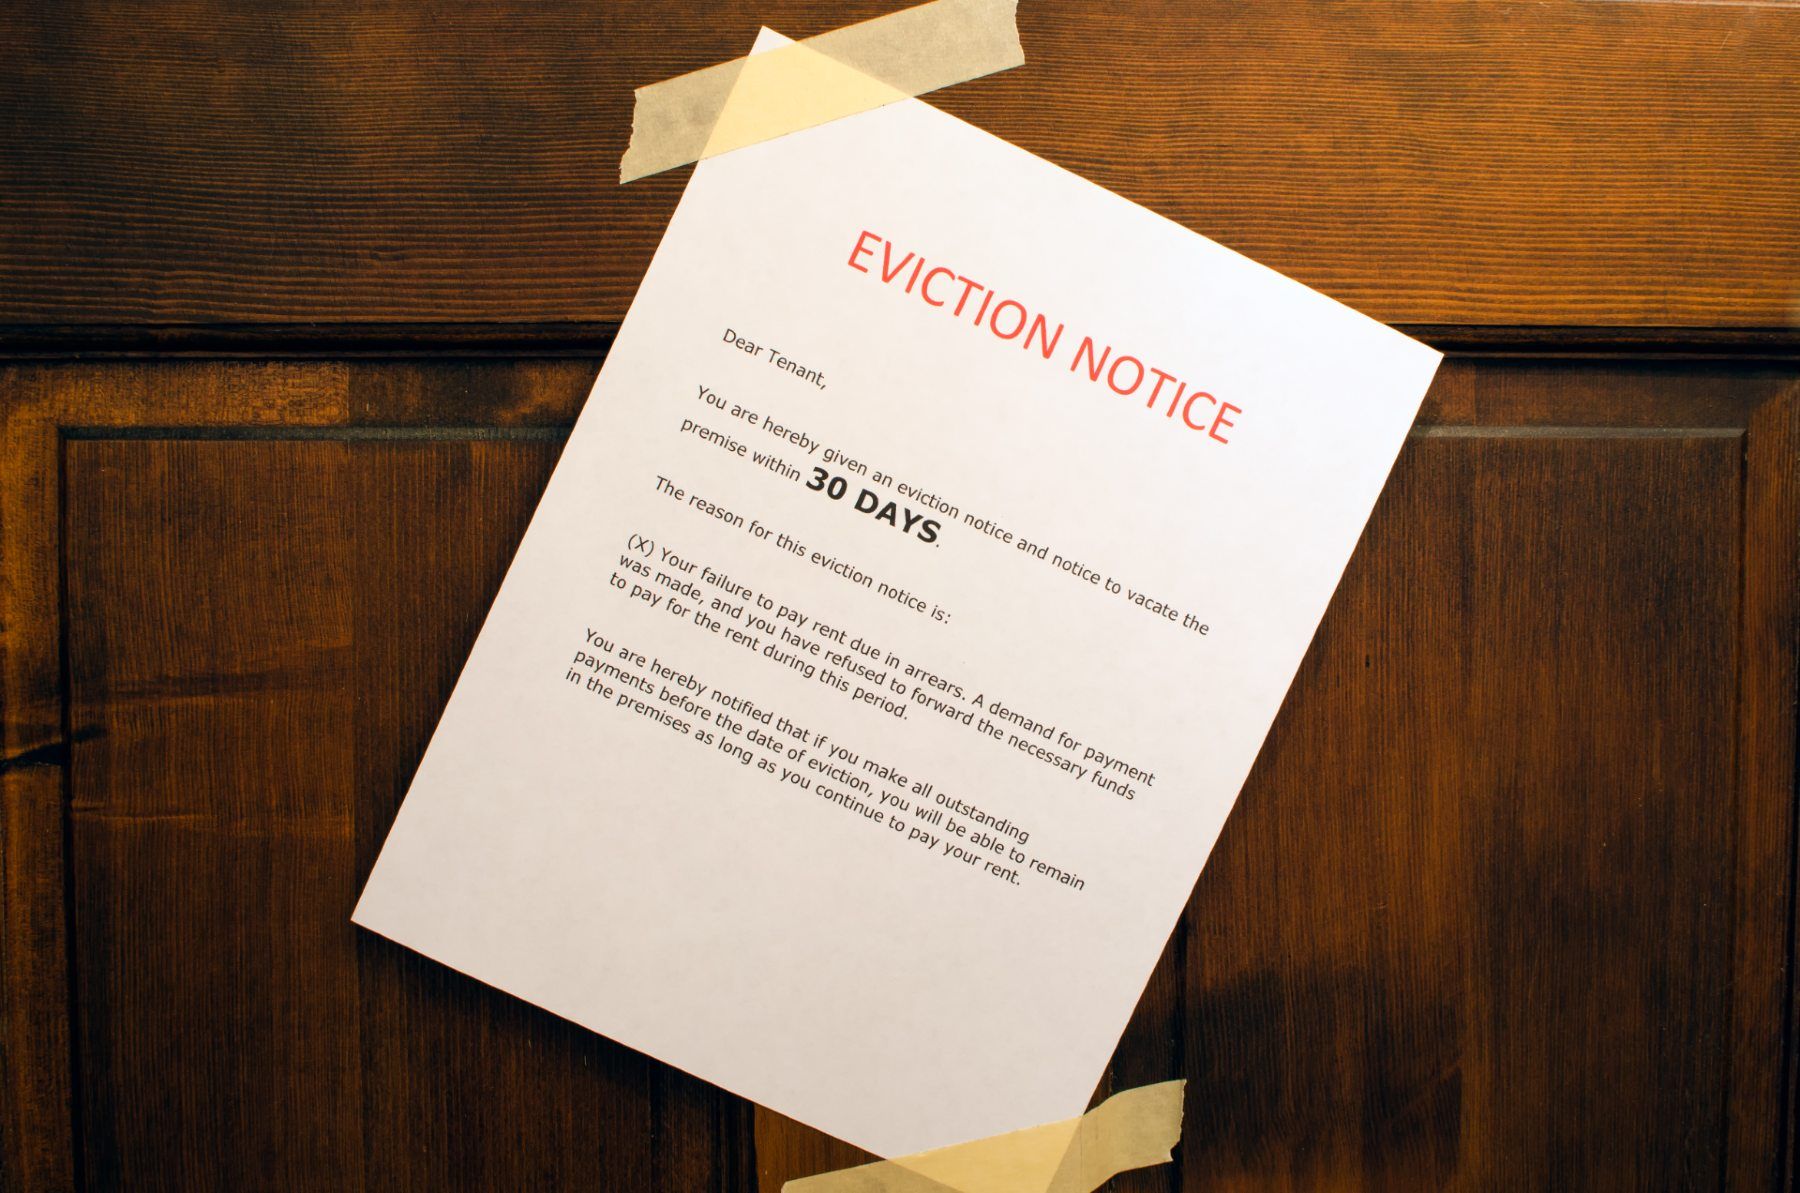 Eviction notice taped at an angle with masking tape on wood door - moratoriums ending